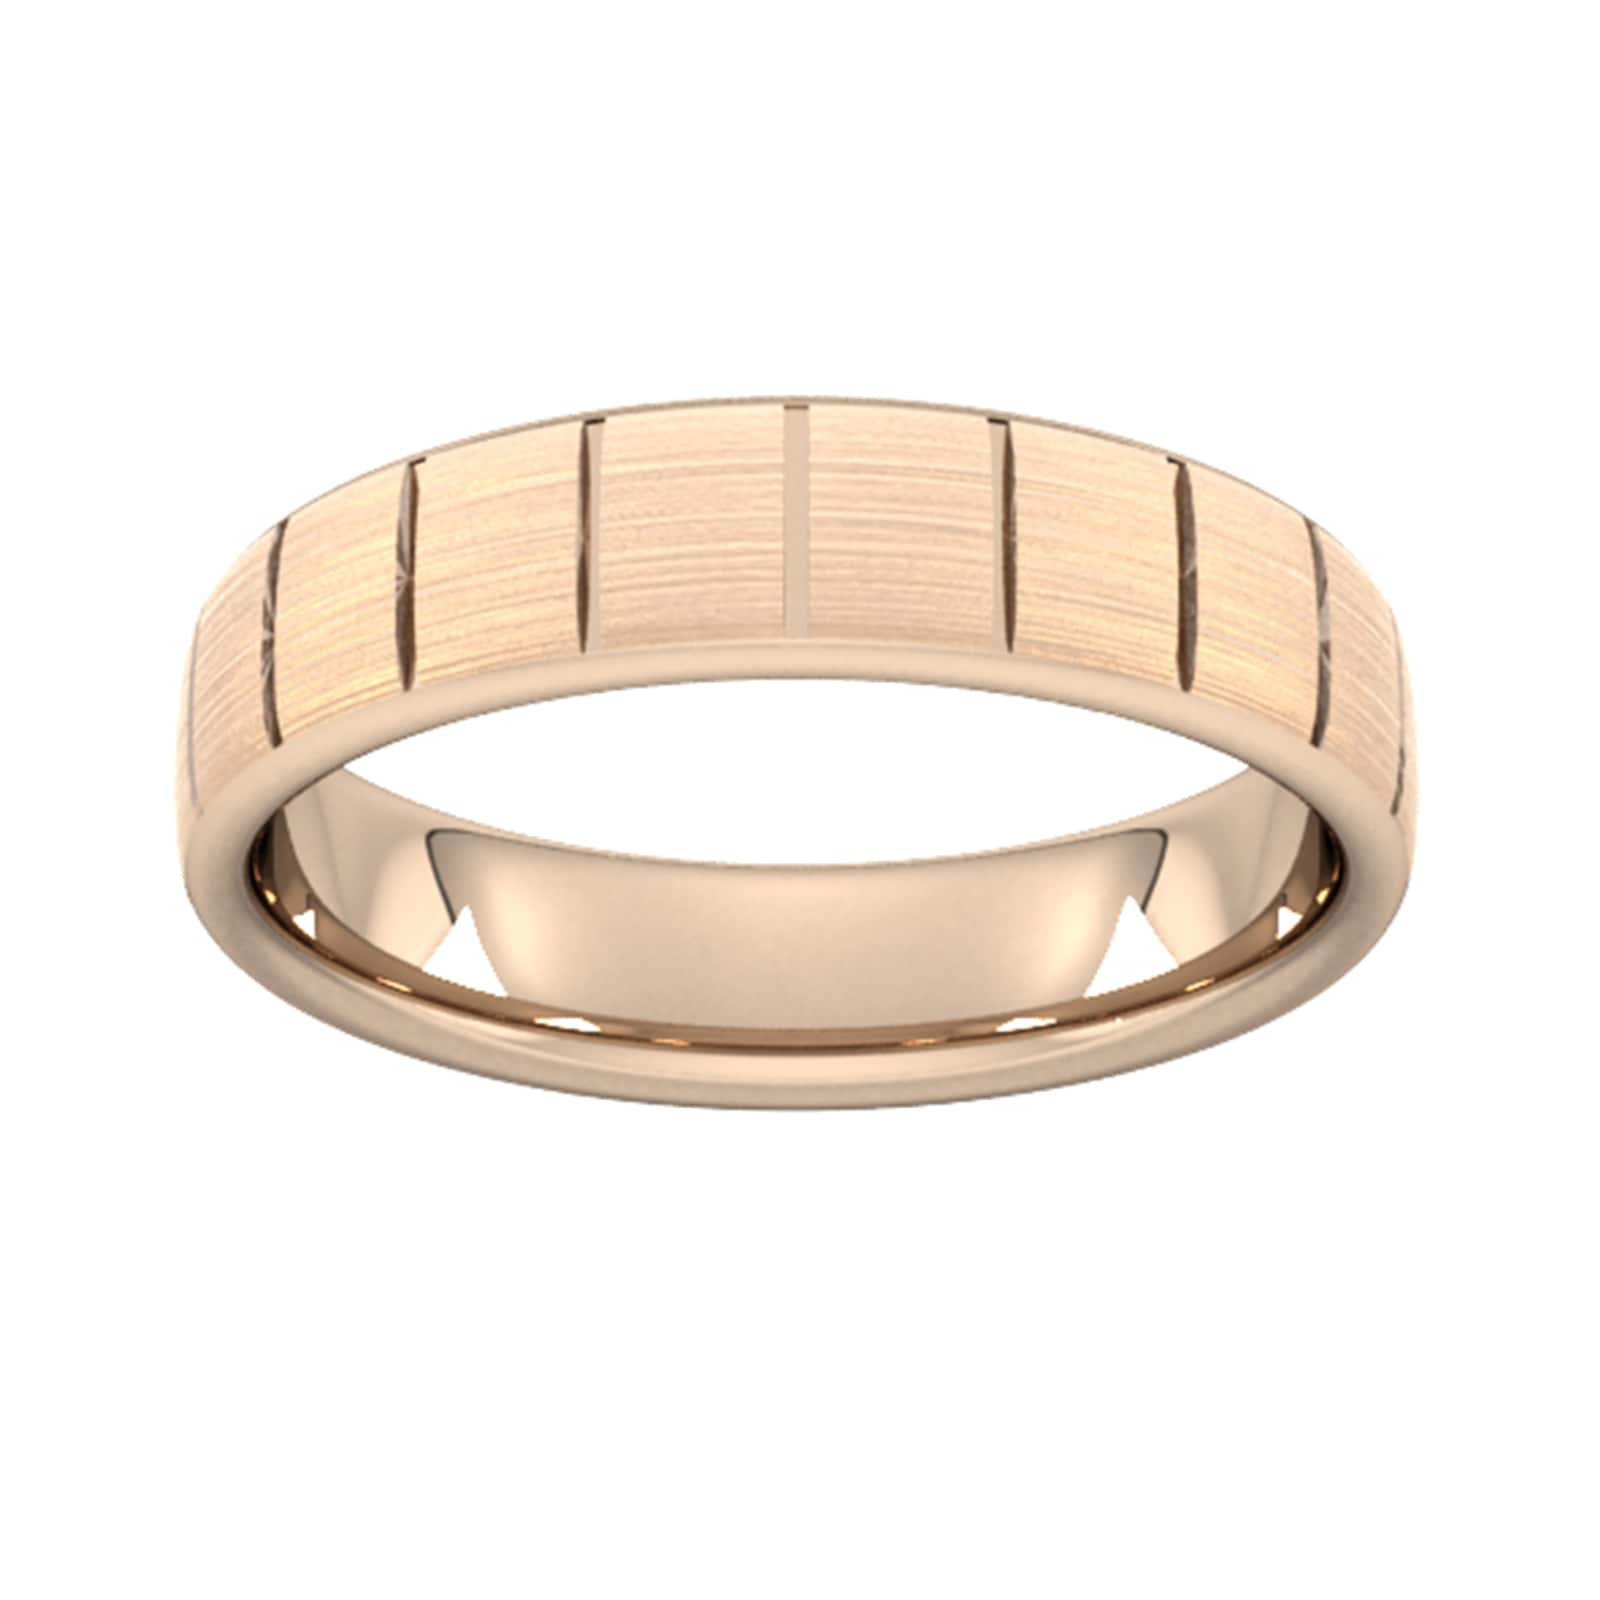 5mm D Shape Heavy Vertical Lines Wedding Ring In 9 Carat Rose Gold - Ring Size L